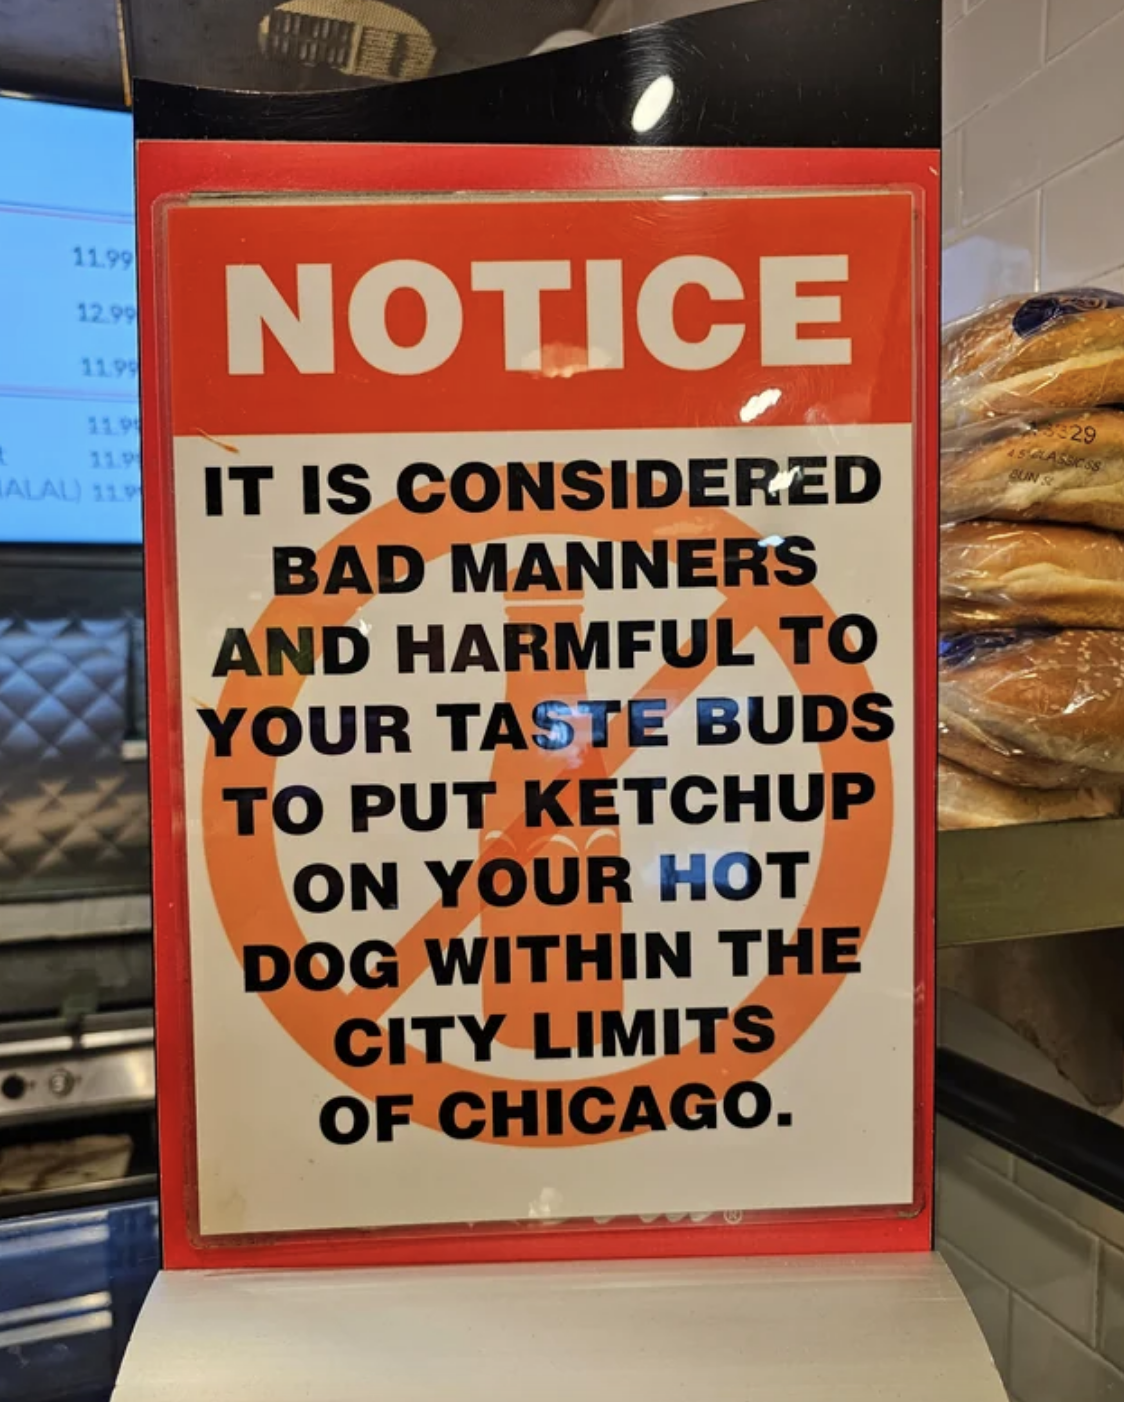 &quot;It is considered bad manners and harmful to your taste buds to put ketchup on your hot dog within the city limits of Chicago.&quot;